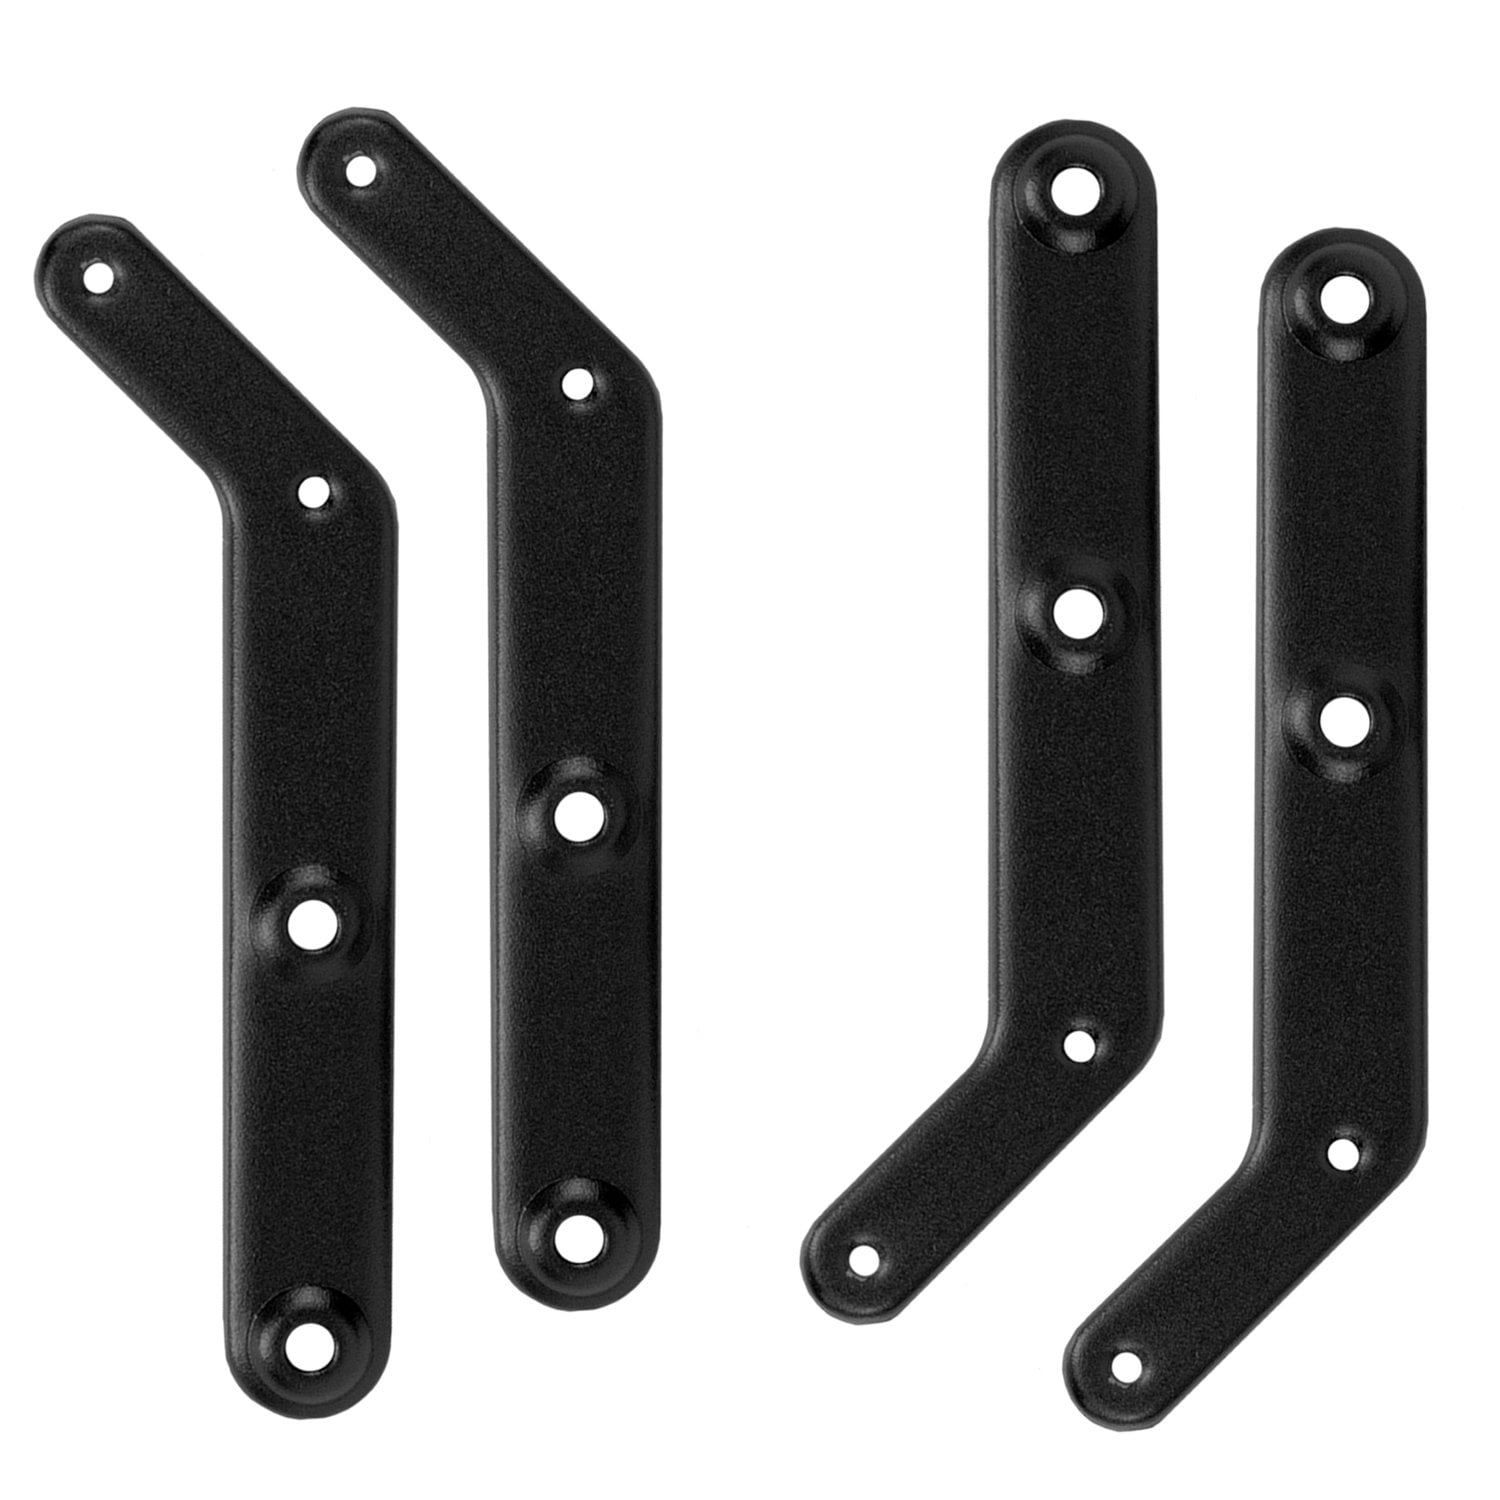  Mount-It! VESA Mount Adapter Kit, TV Wall Mount Bracket  Adapter Converts 200x200 mm Patterns to 300x300 and 400x400 mm, Fits Most  32 Inch to 55 Inch TVs